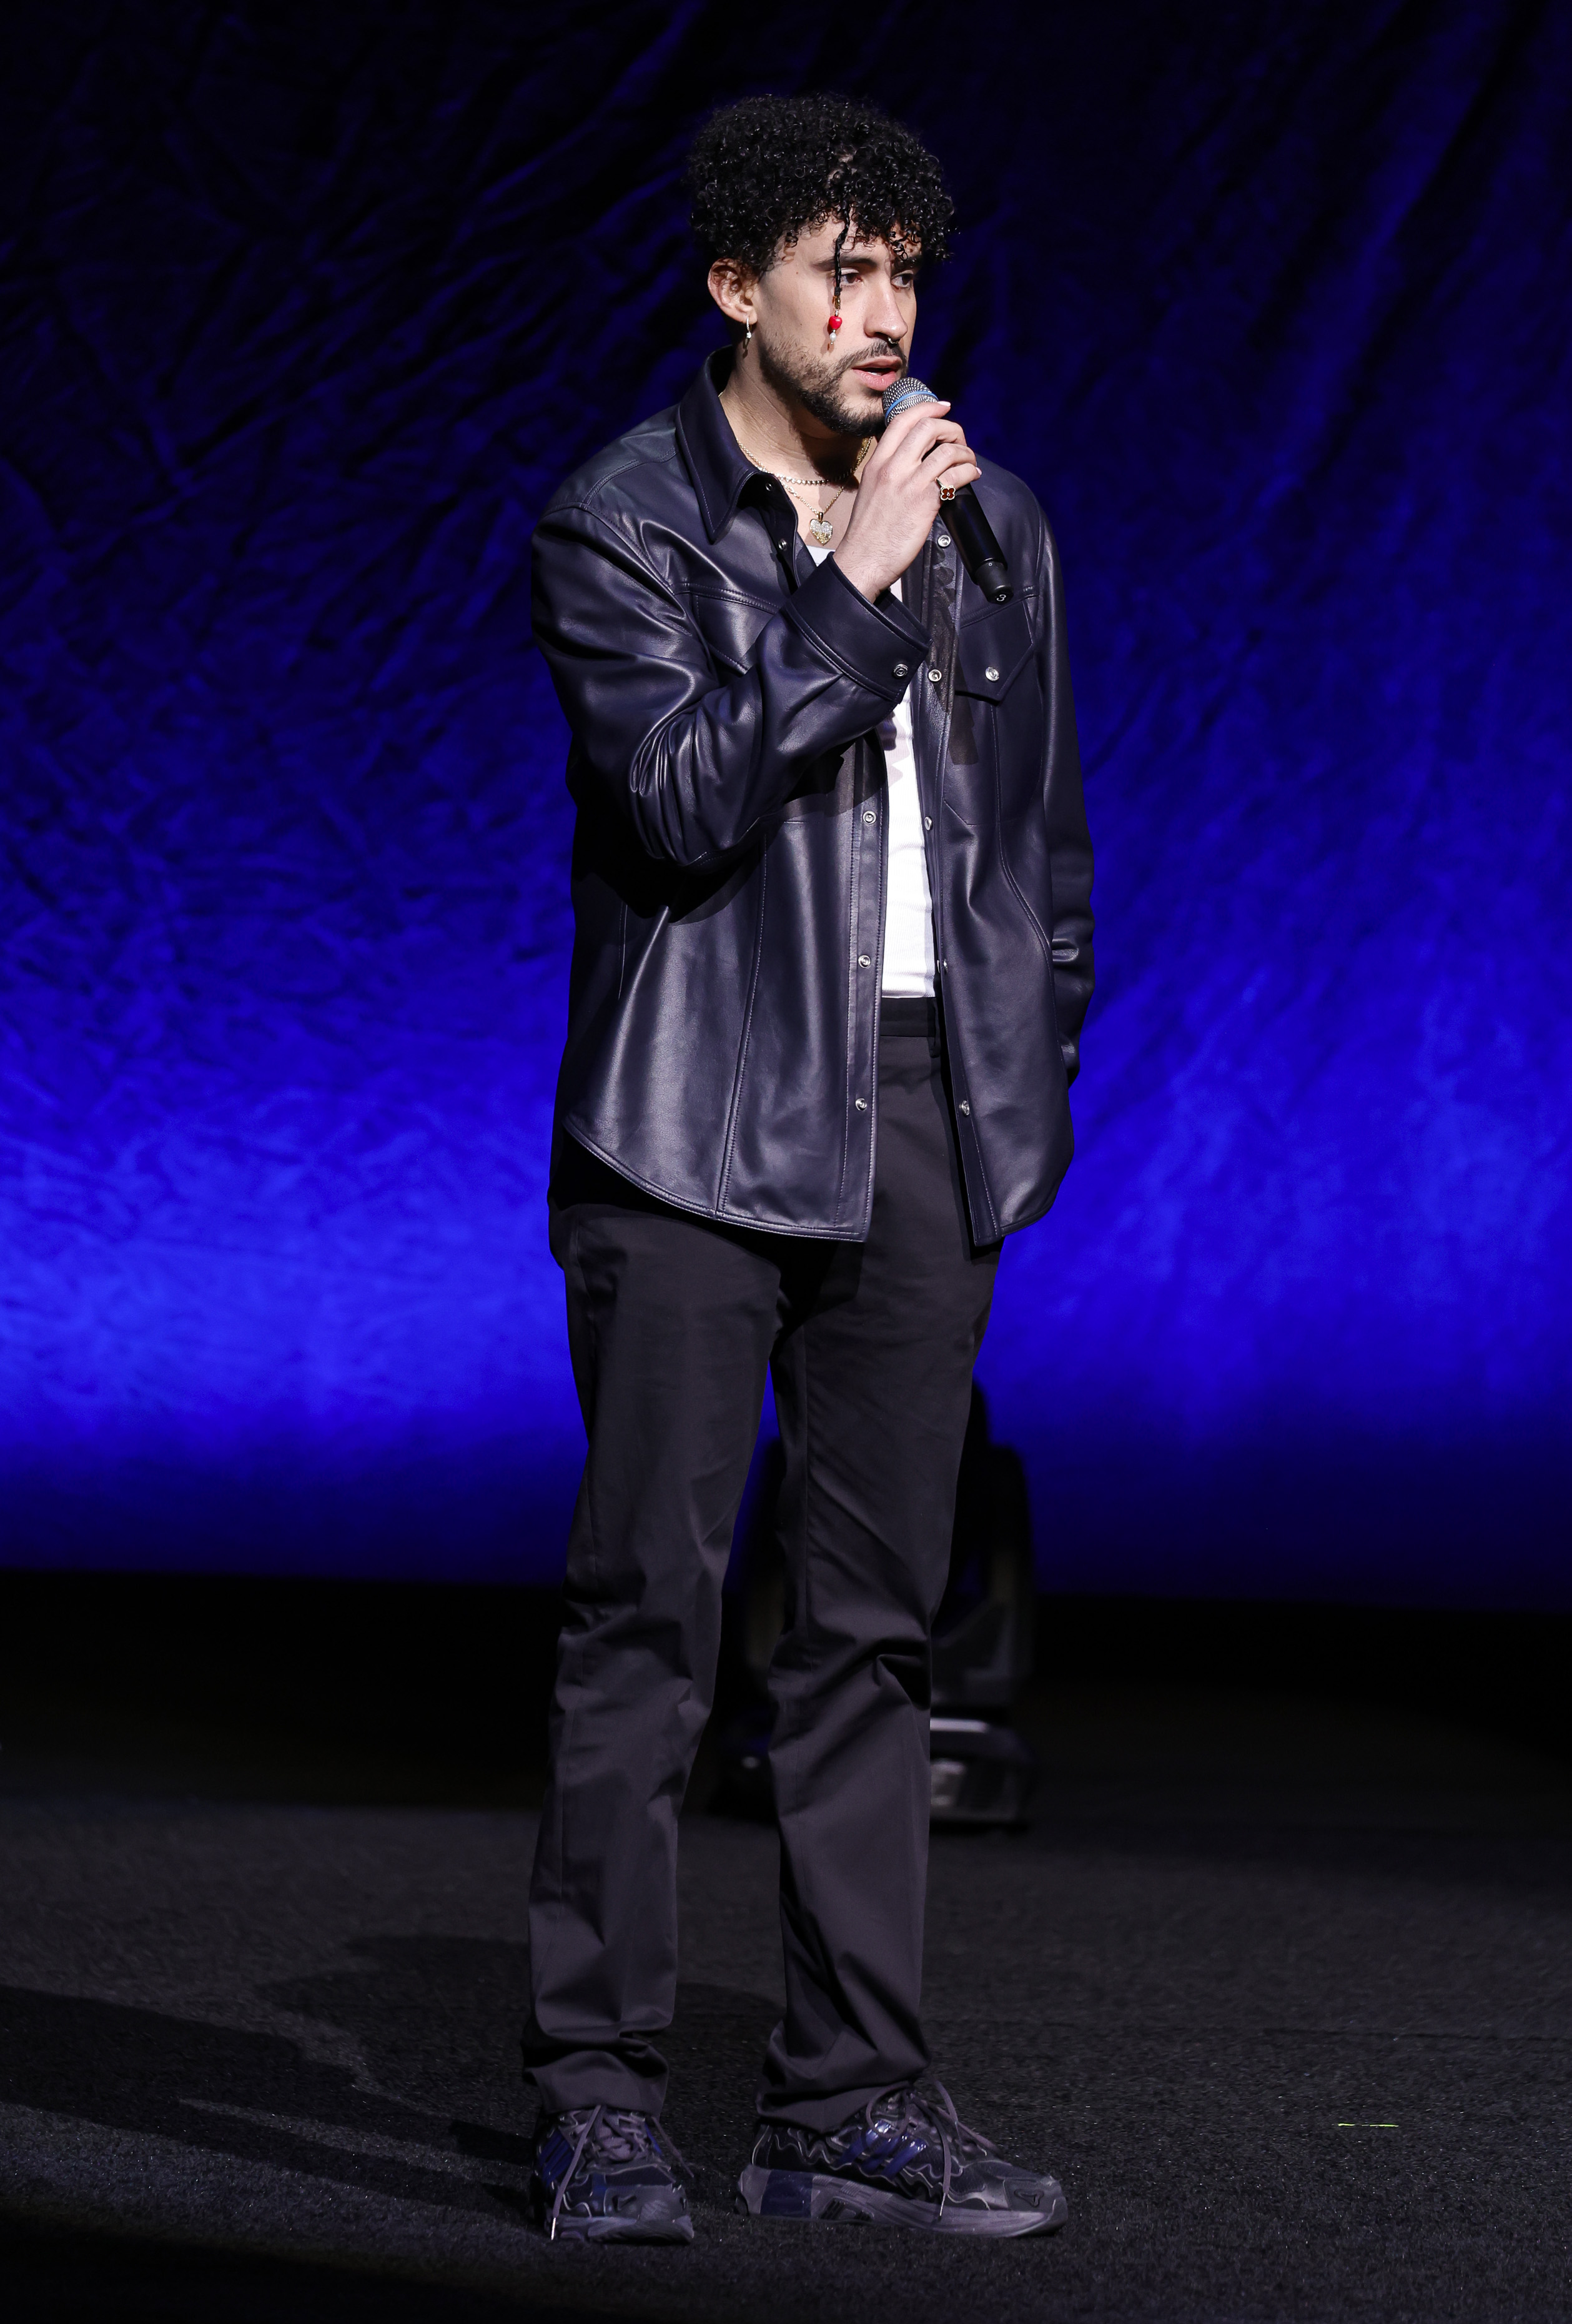 Bad Bunny on stage at CinemaCon